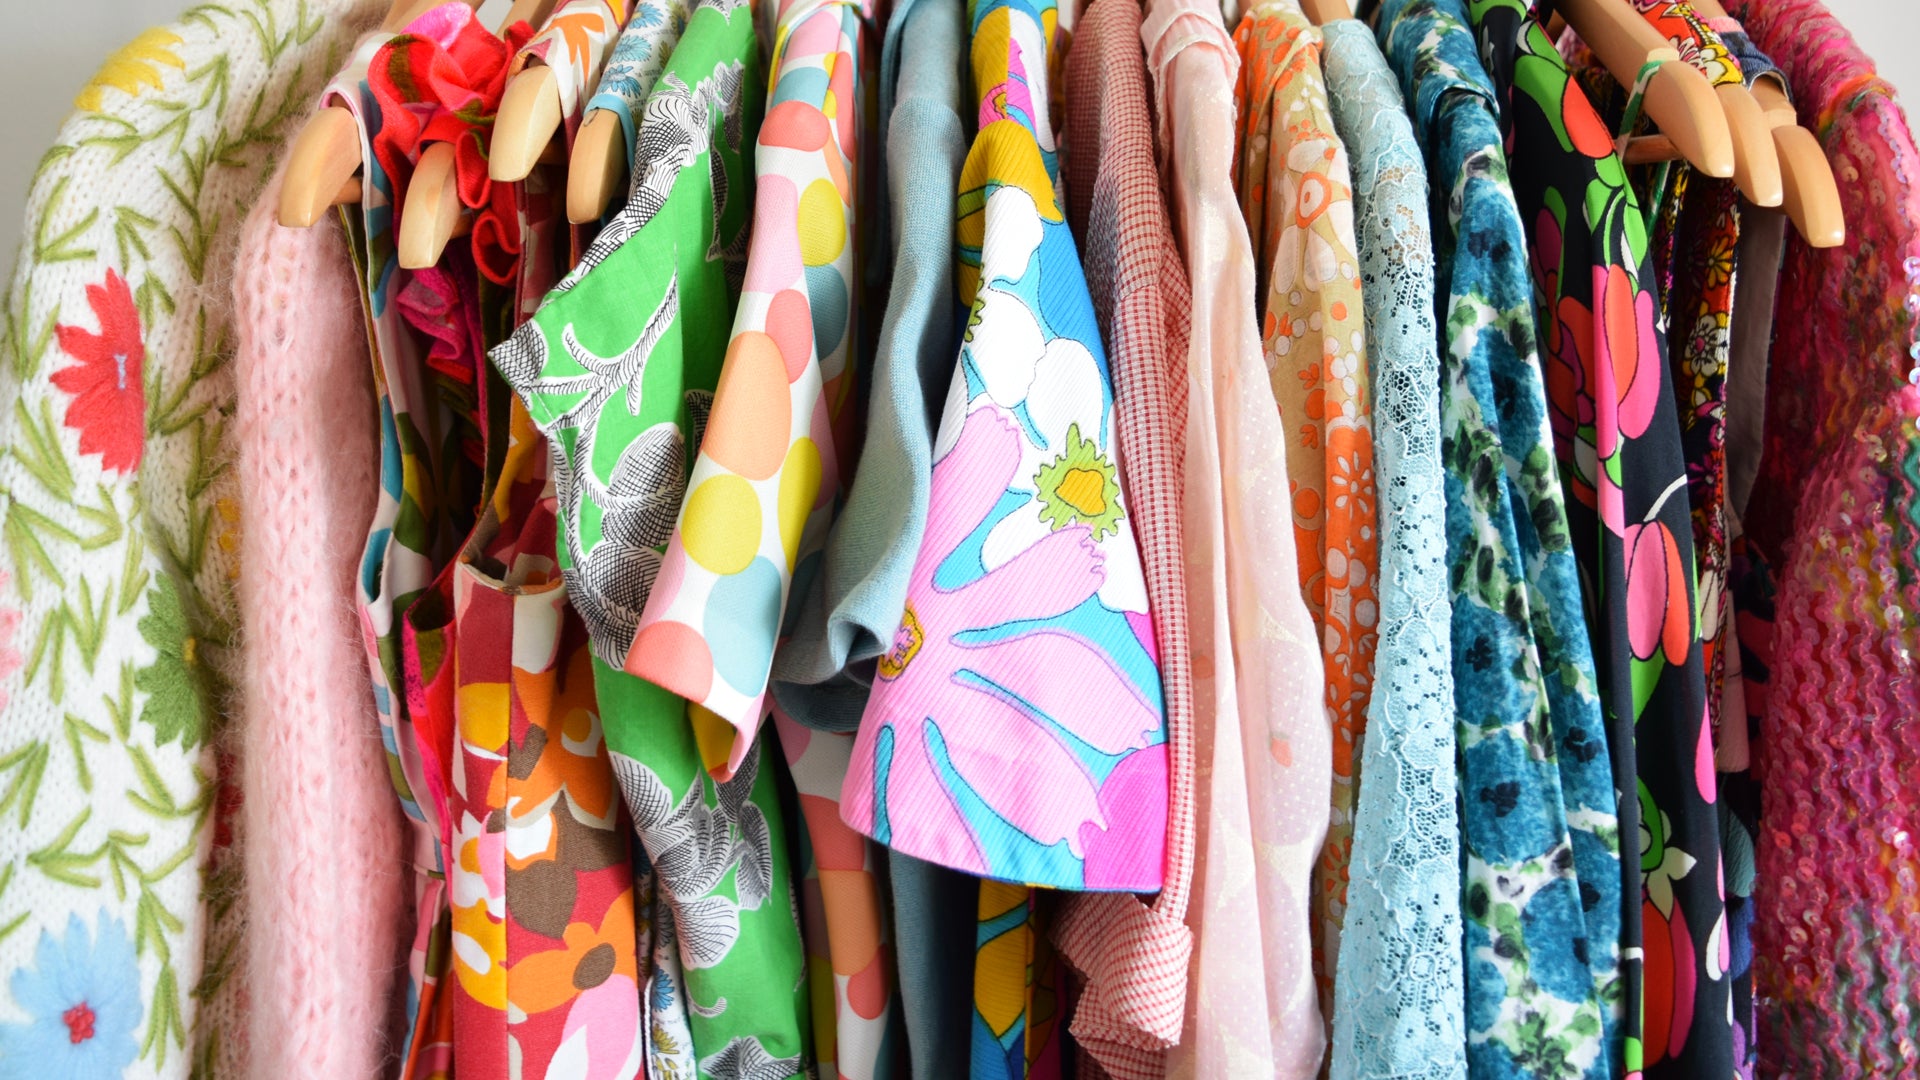 A close up of a row of colorful vintage clothing in all sorts of patterns on wooden hangers